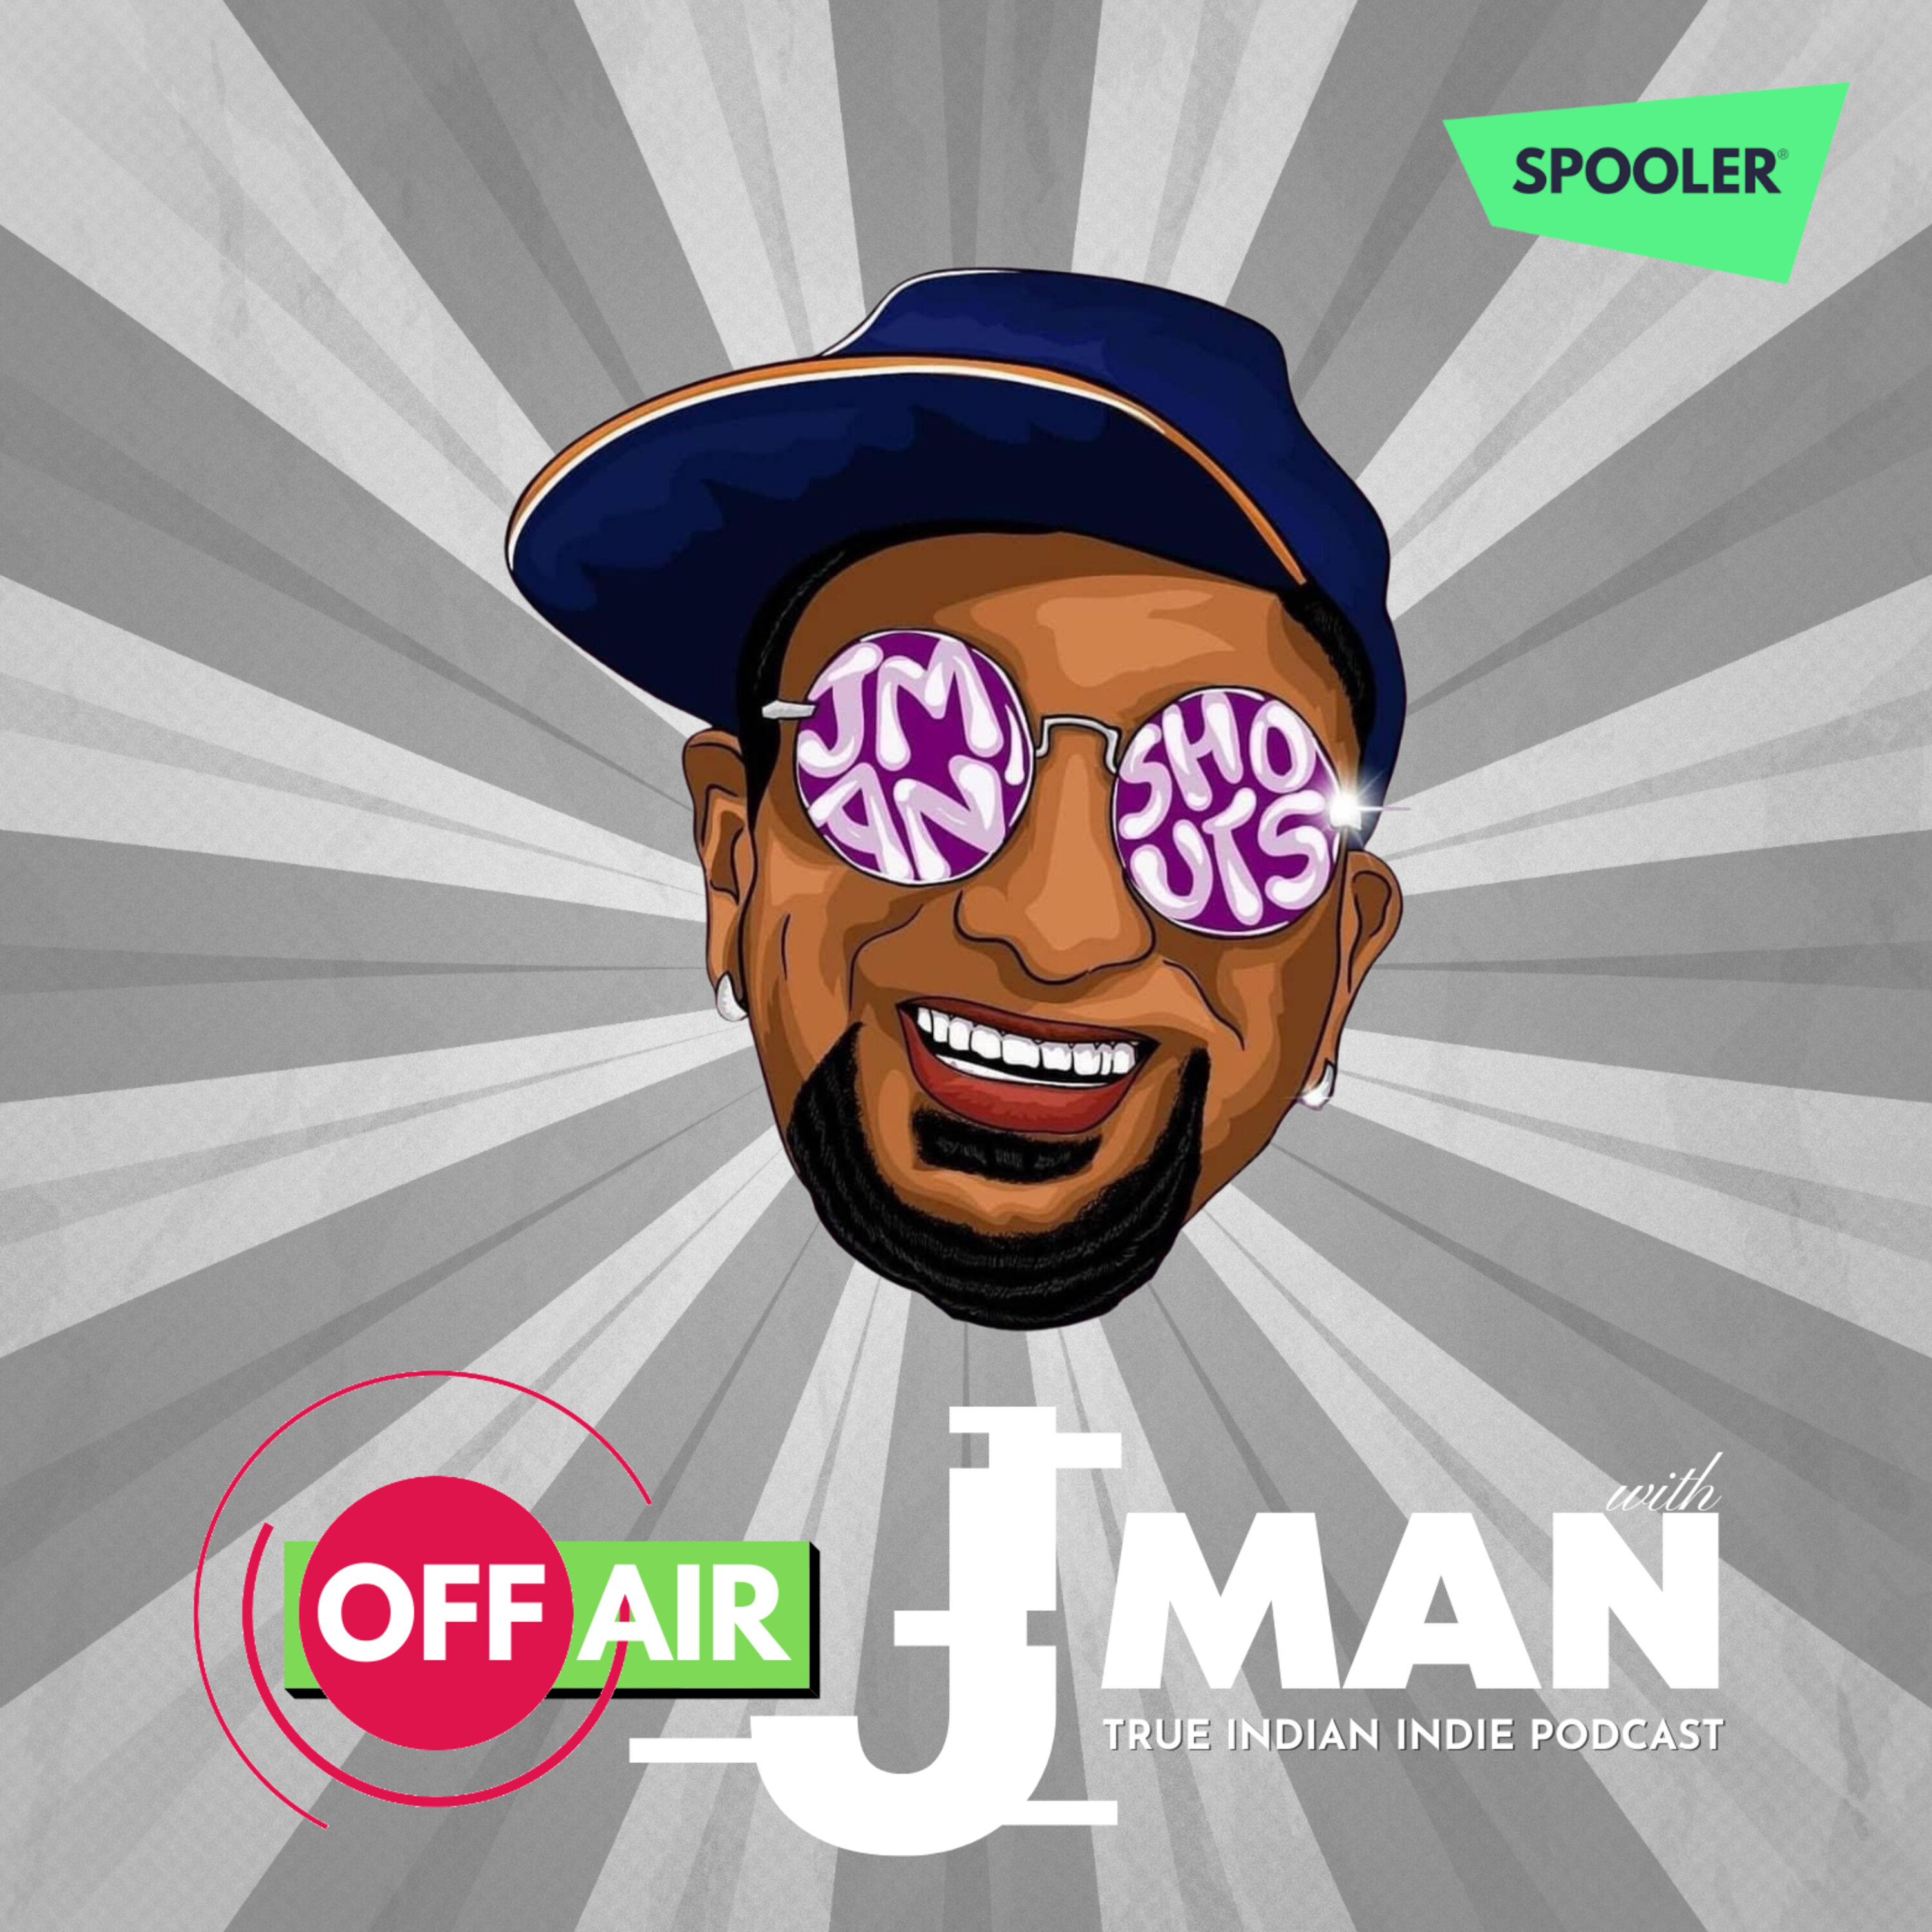 OFF AIR with J MAN